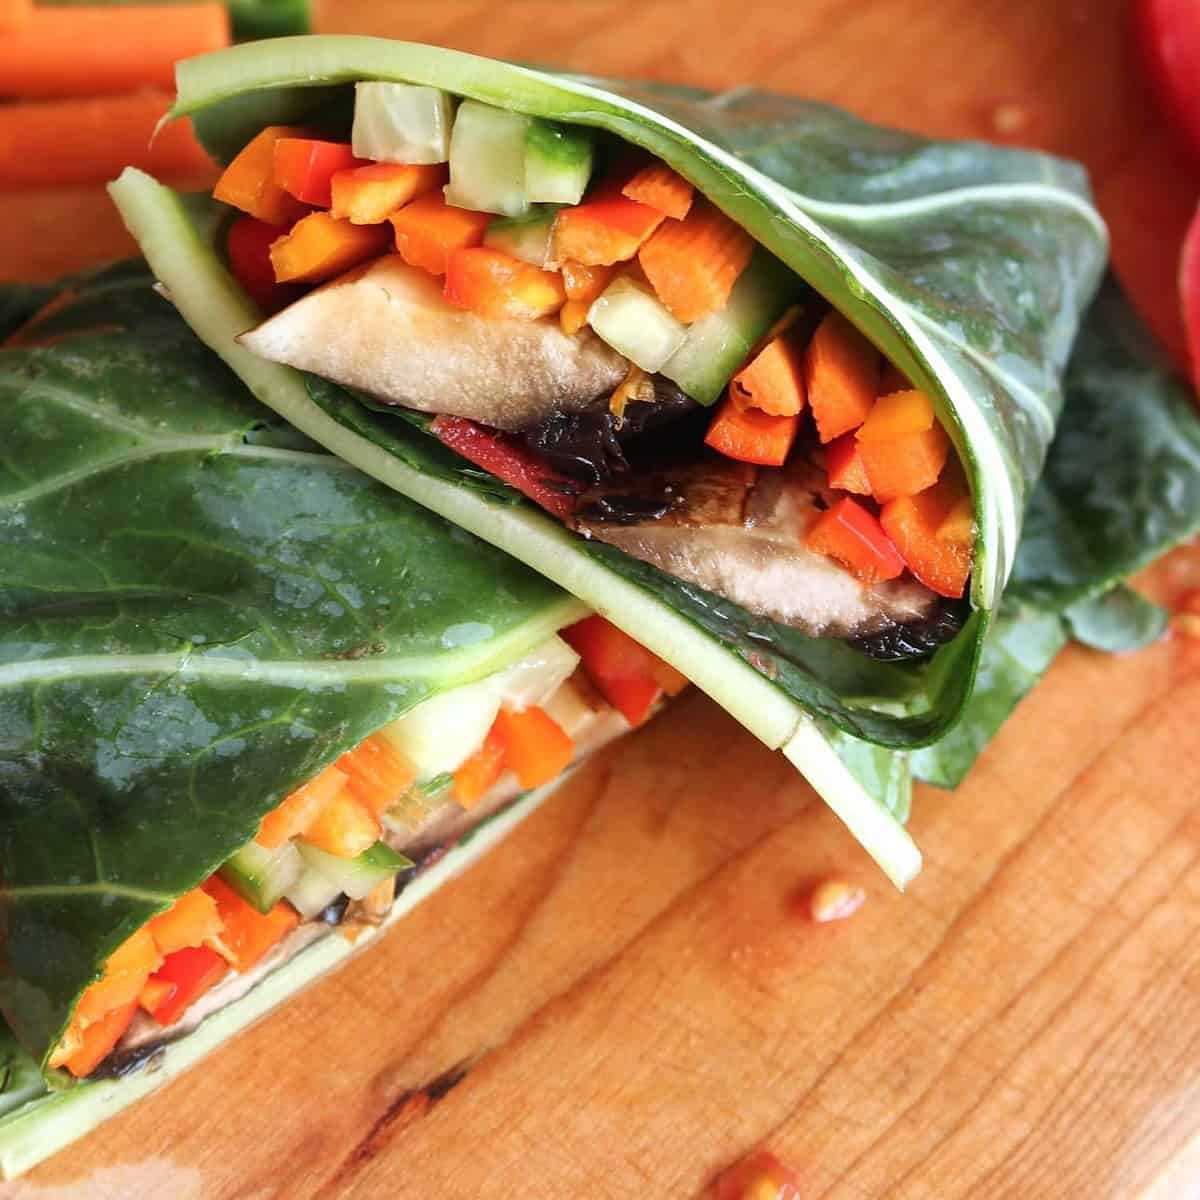  These vibrant orange slaw wraps bring sunshine to my plate and my mood.